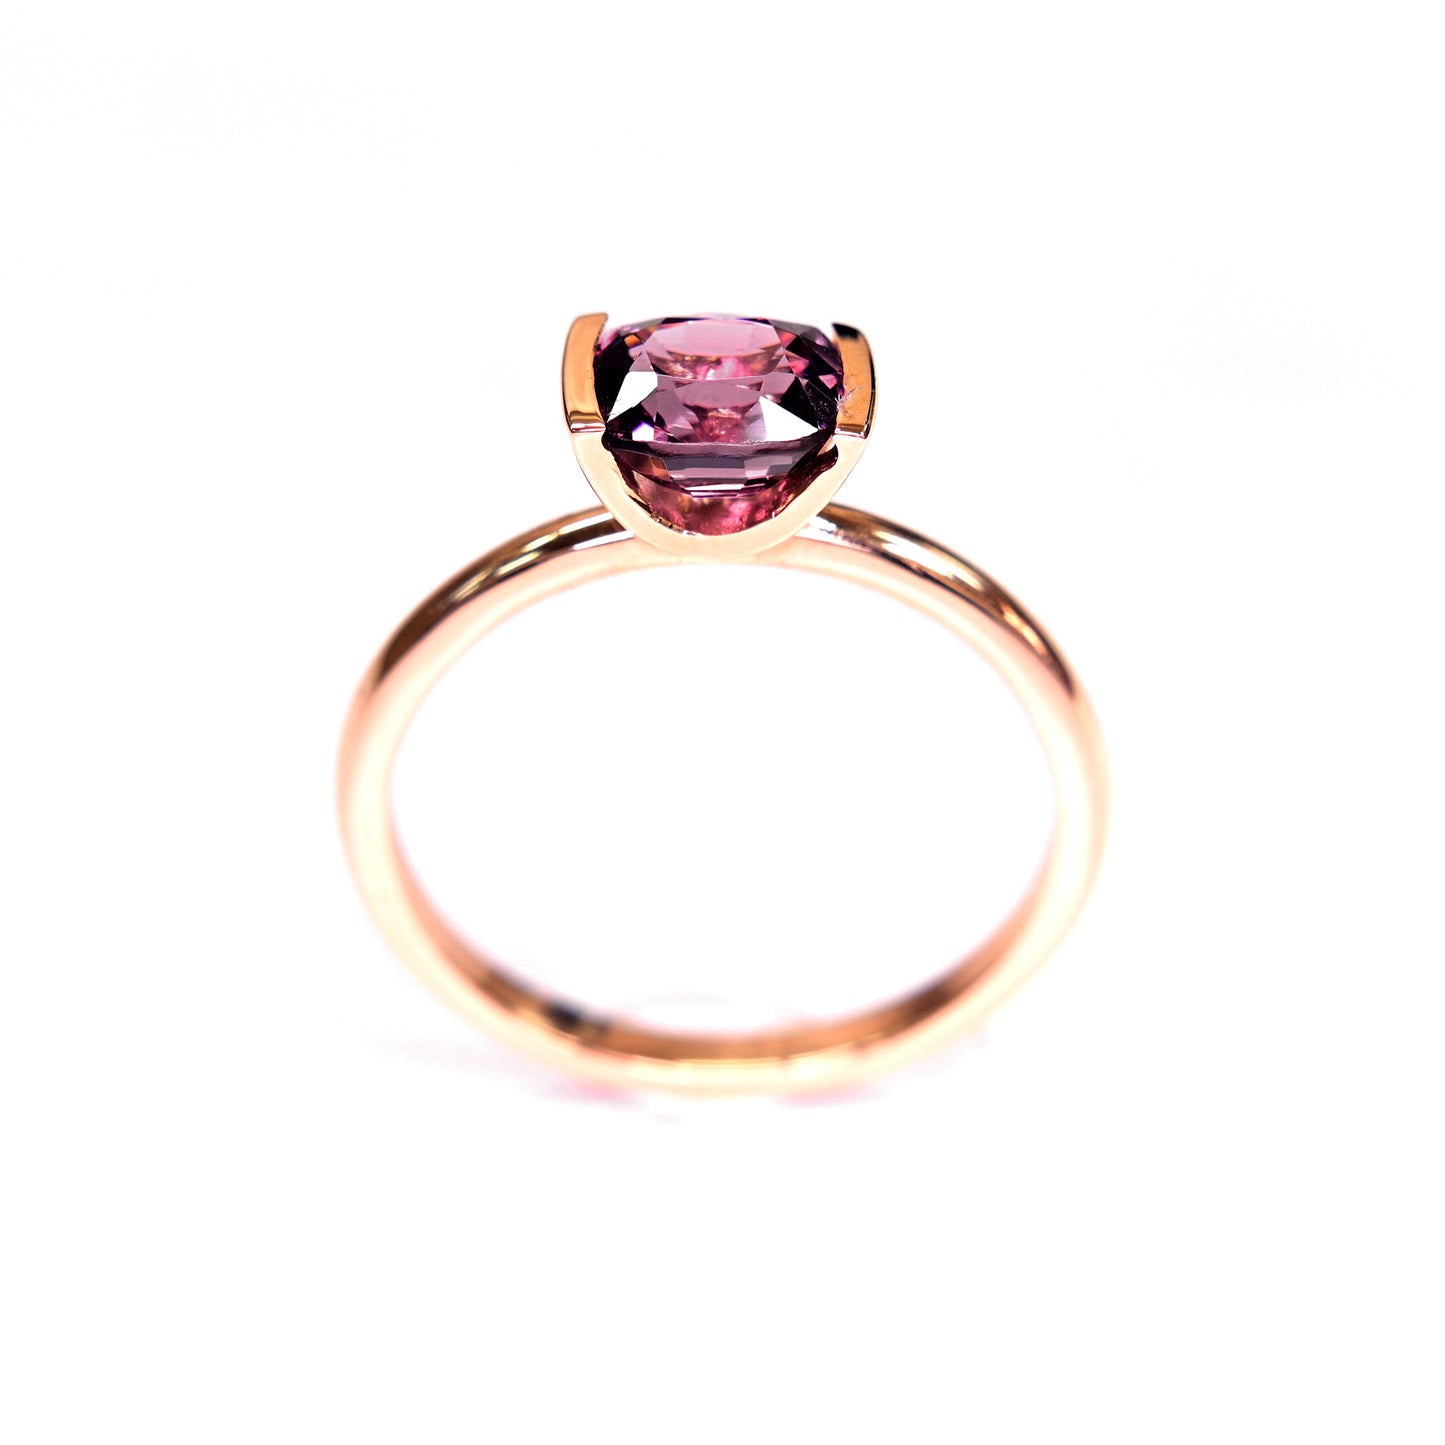 Beautiful unheated spinel ring in an contemporary design